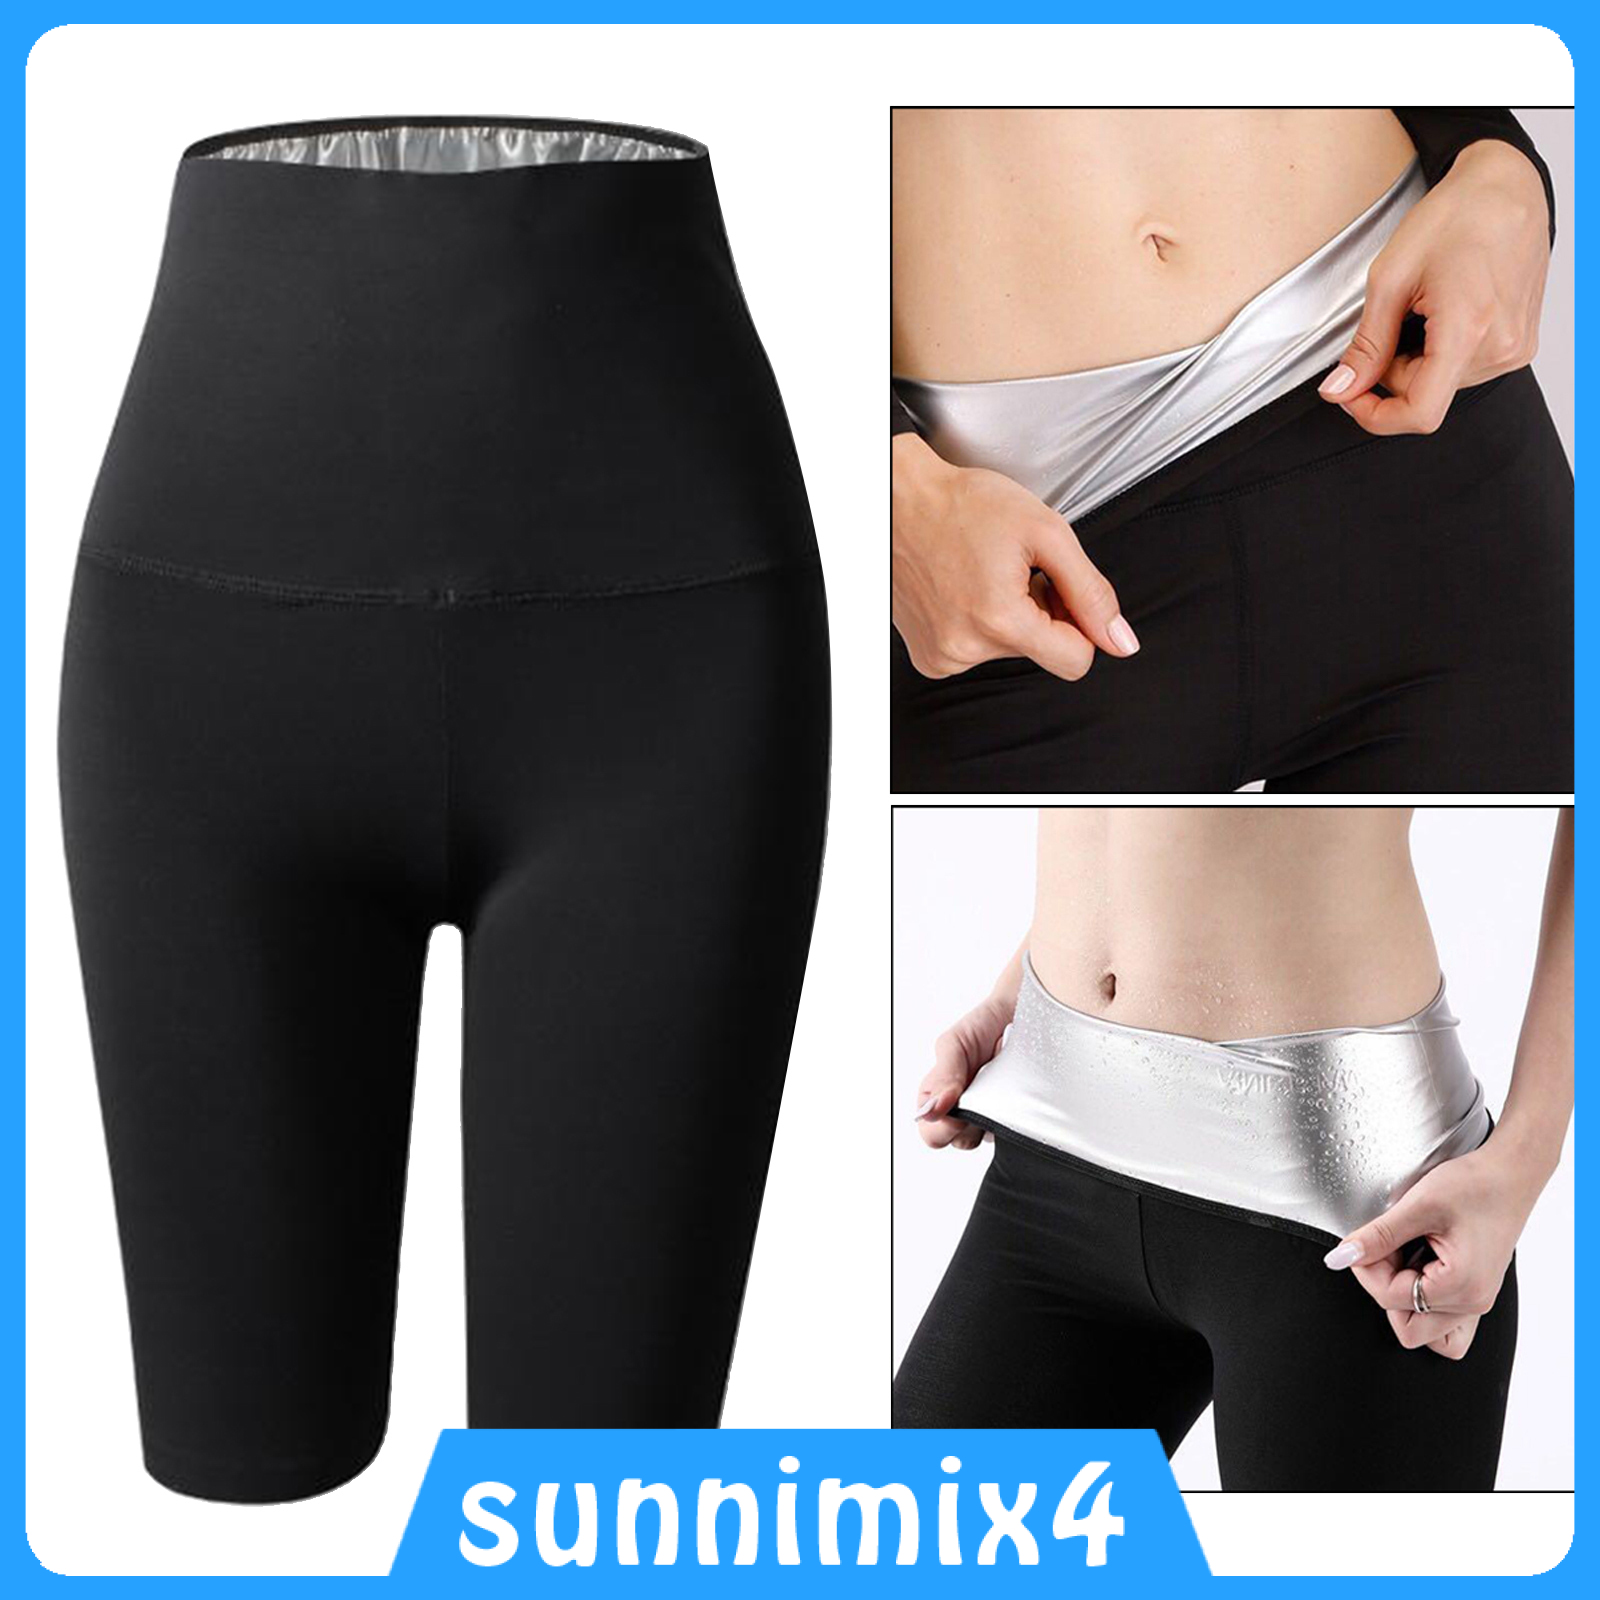 [H₂Sports&Fitness]Women Sauna Sweat Pants Training Yoga Leggings Gym Fitness Exercise Pants Workout Thermo Hot Body Shaper Sweat Pants Cycling, Running